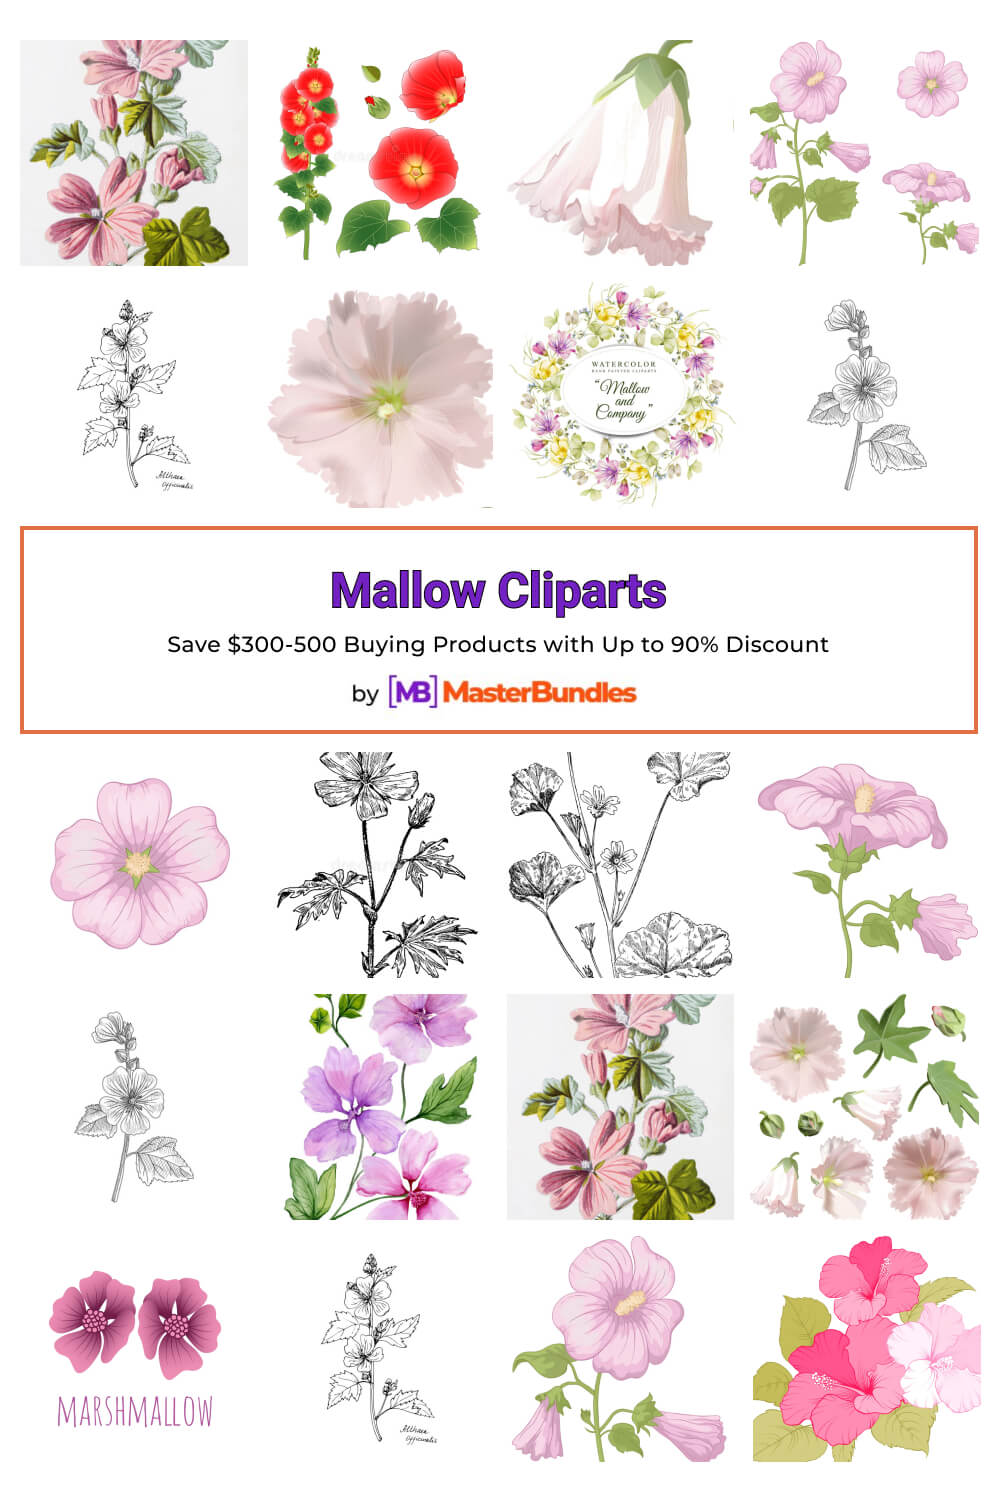 mallow cliparts pinterest image.